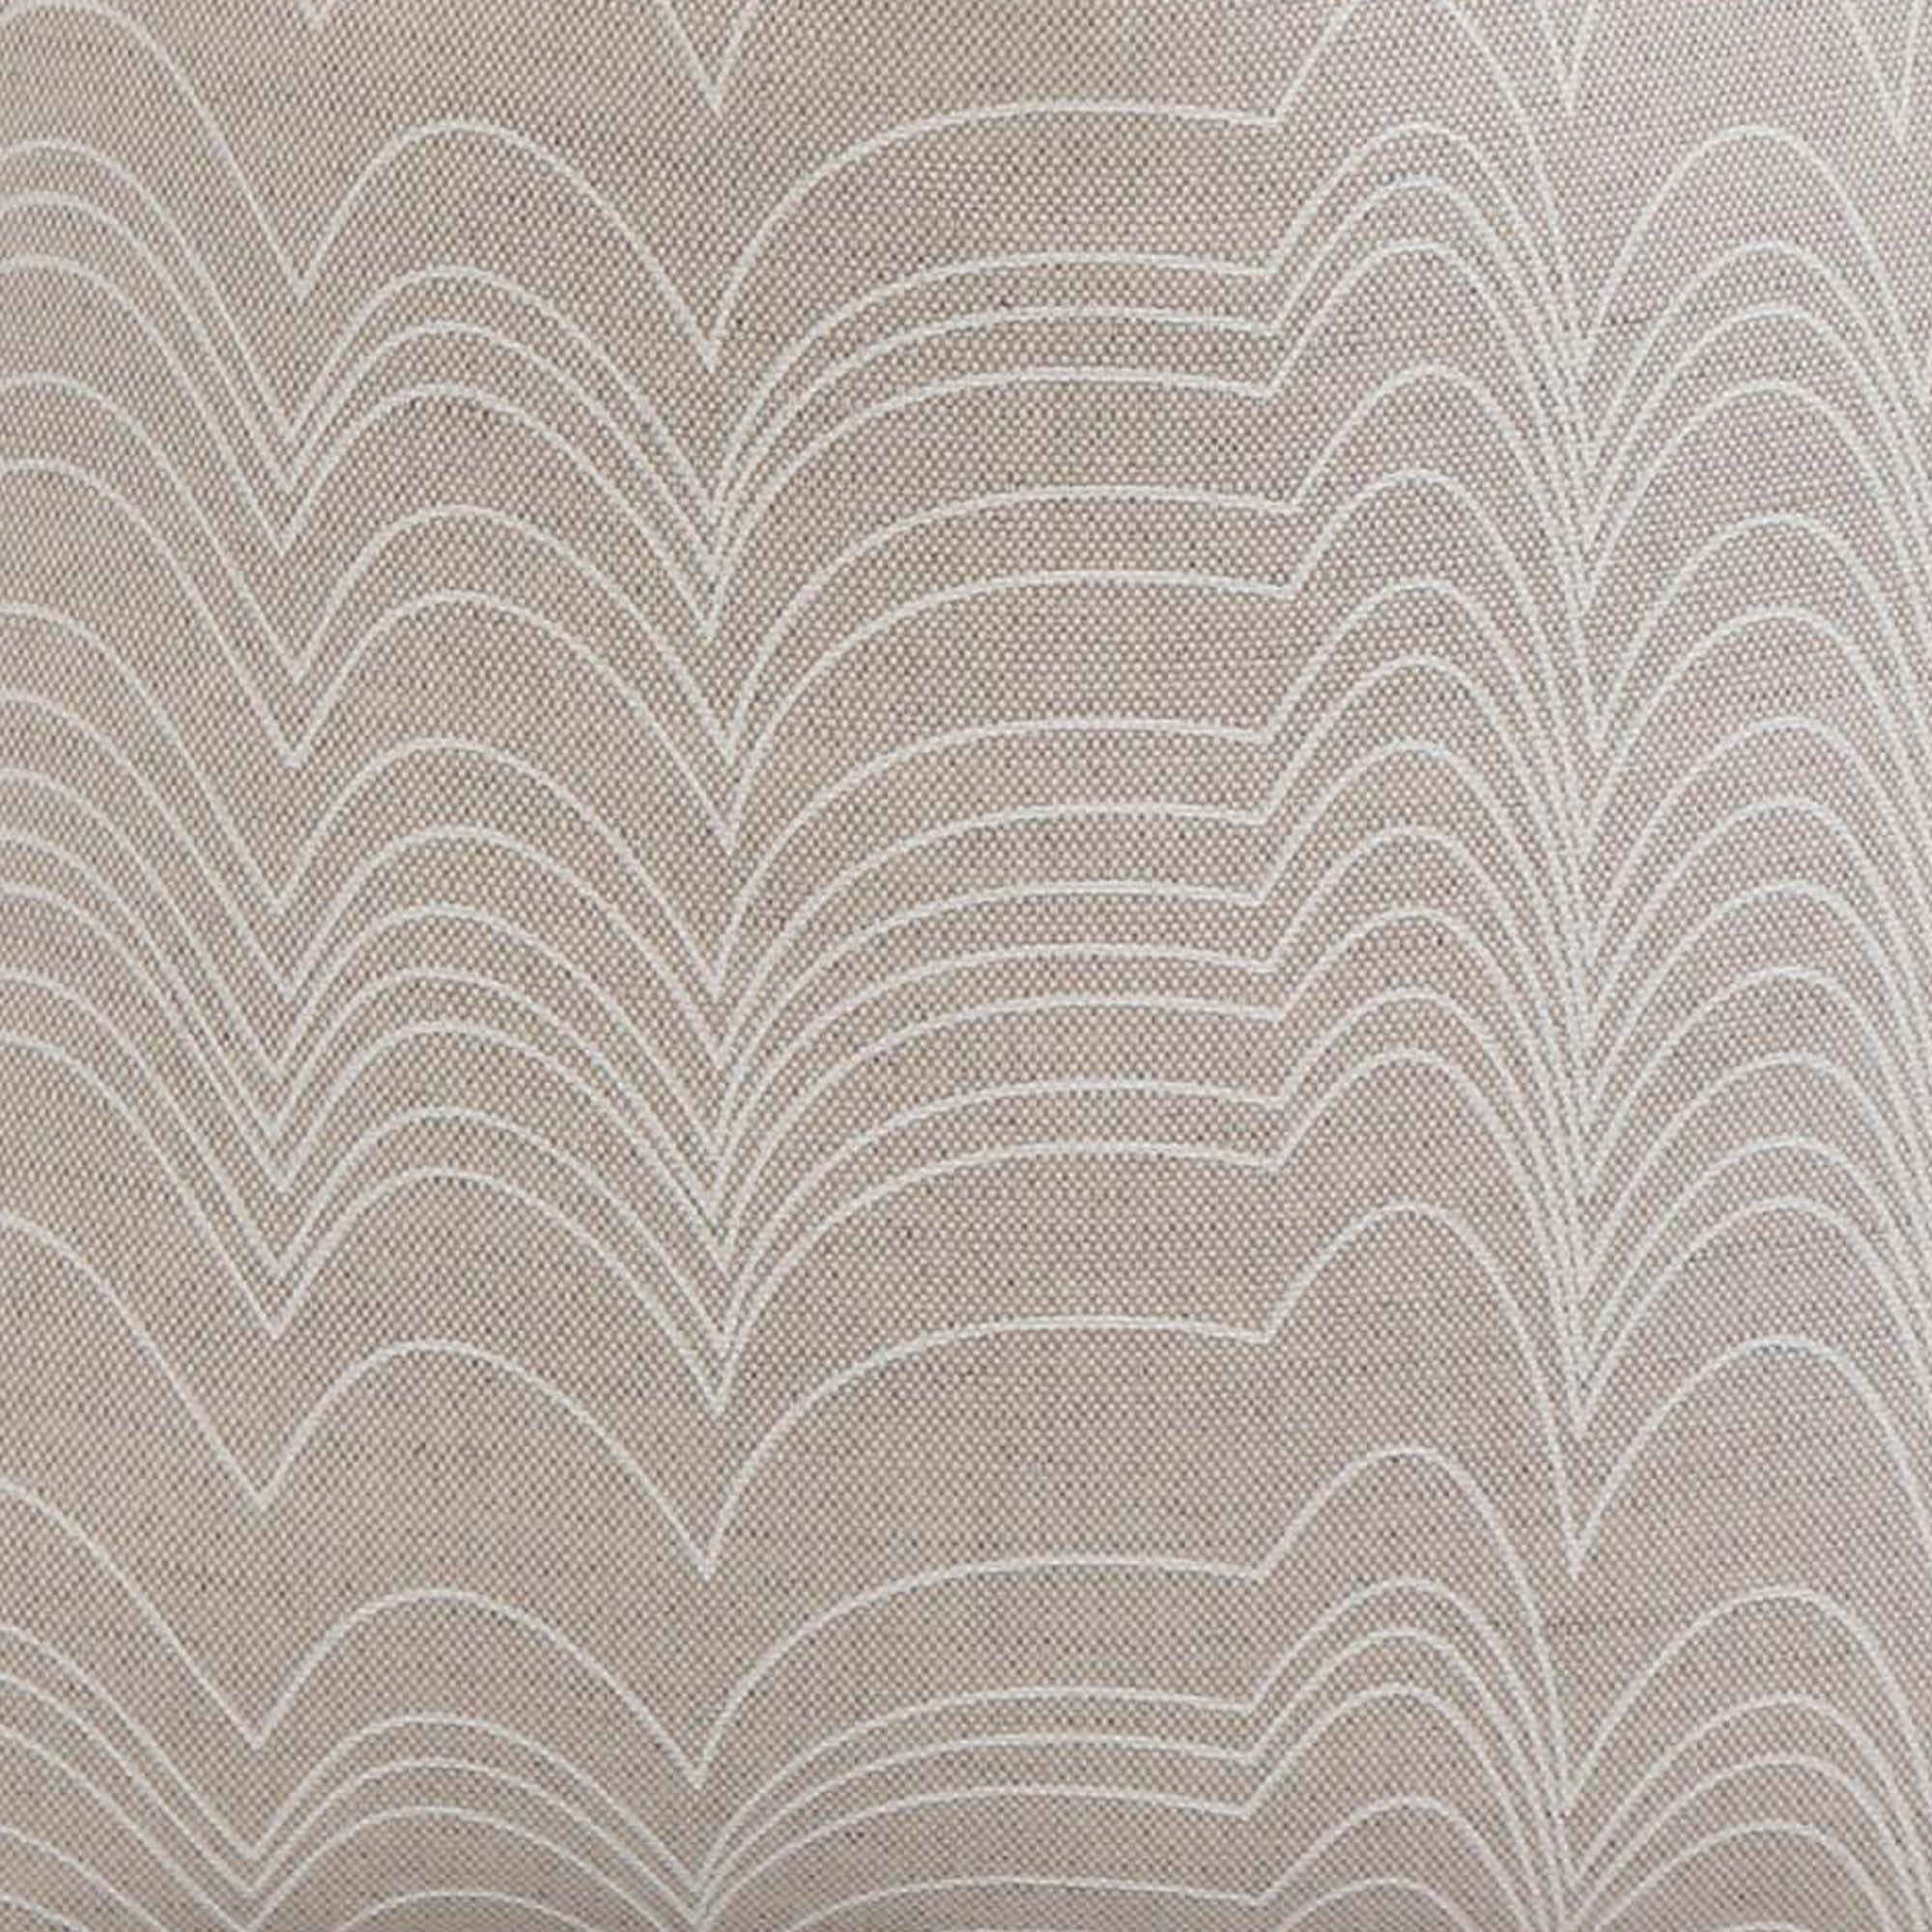 Richter Natural / 4x4 inch Fabric Swatch